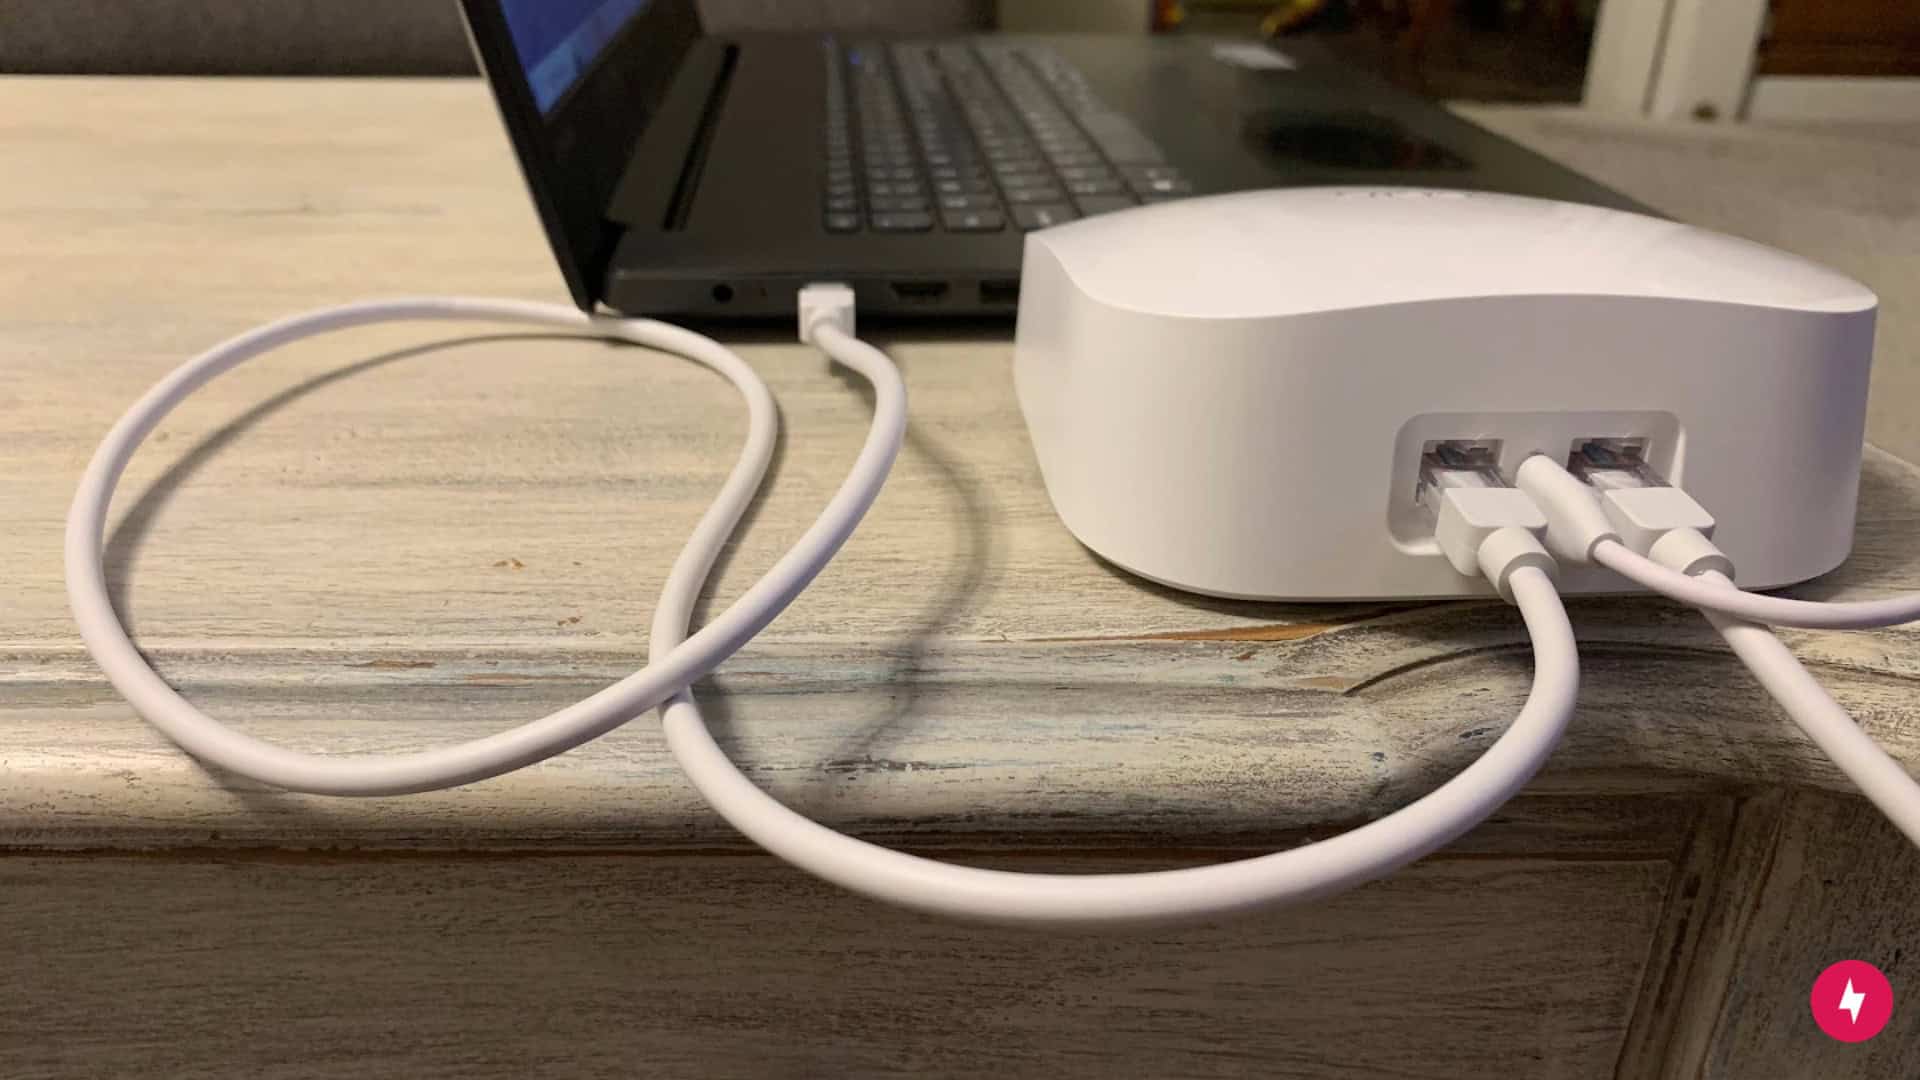 An Ethernet cord beside an Ethernet port on a white Eero router.